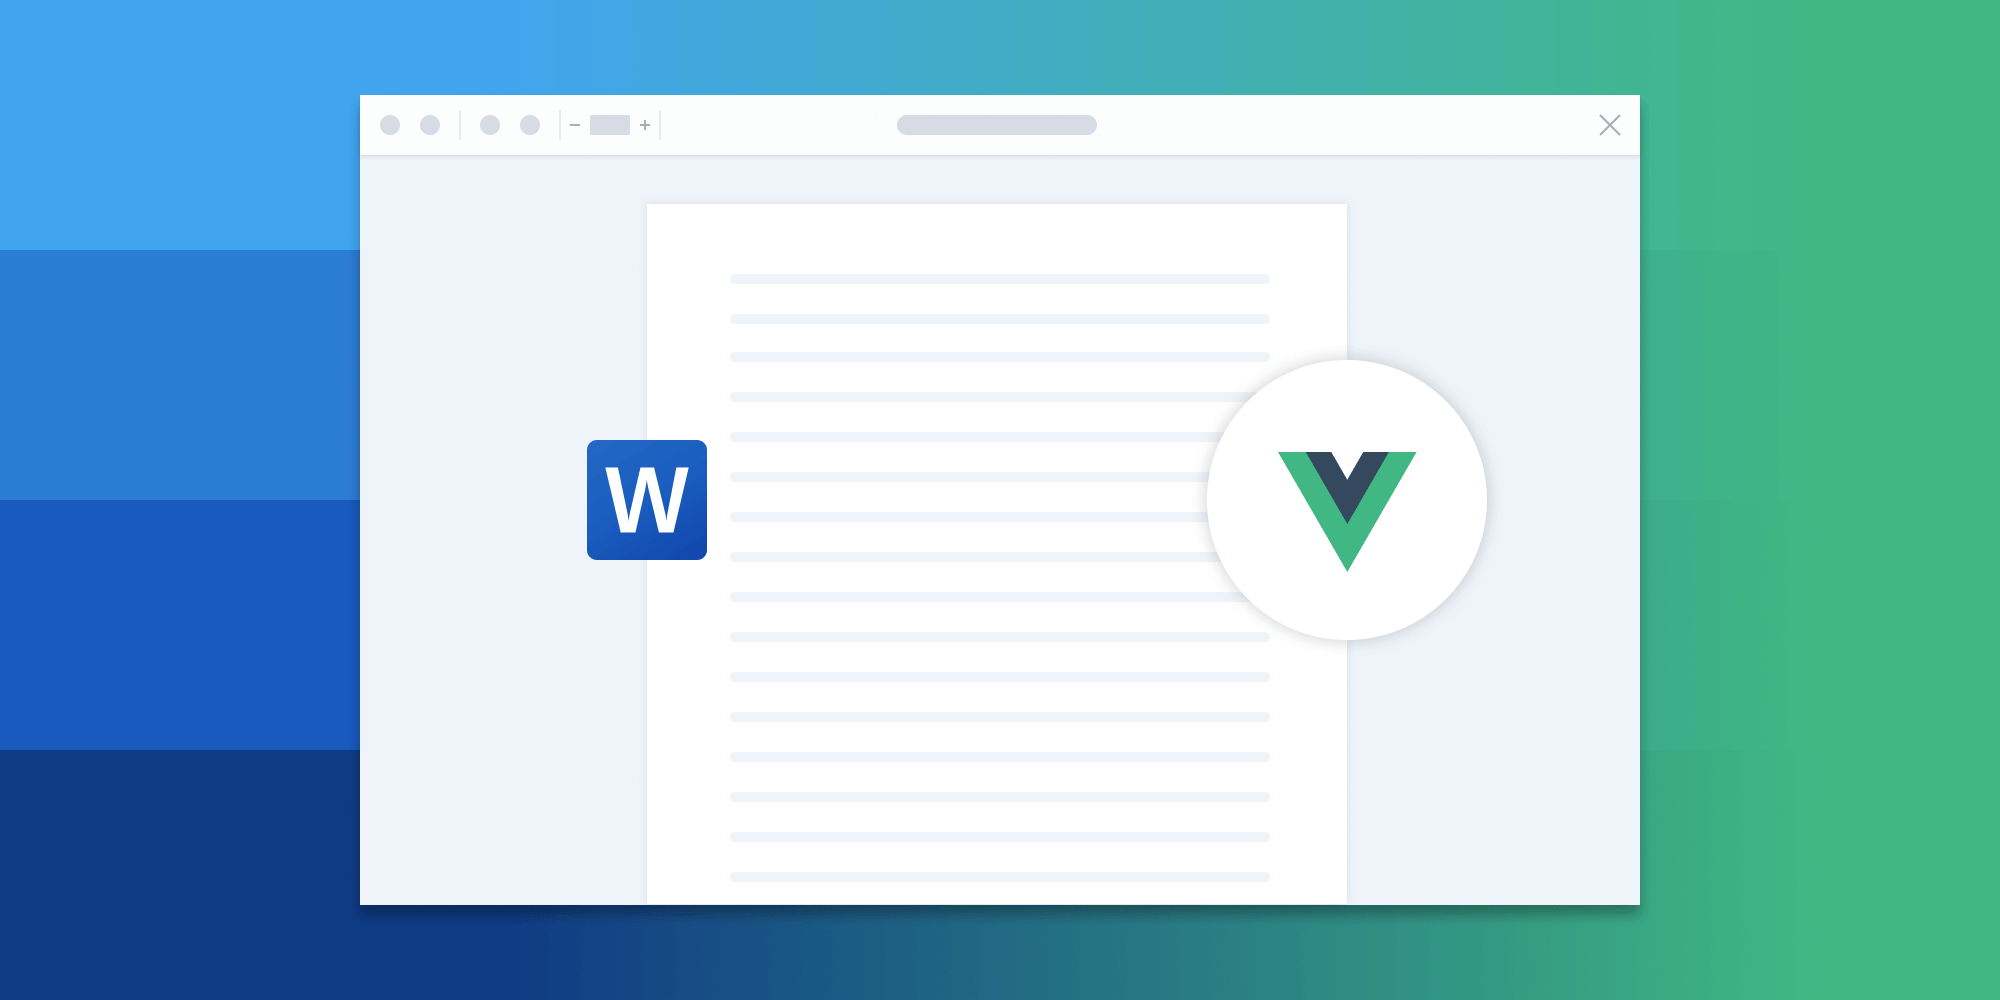 Illustration: How to Build a Vue.js Word (DOC and DOCX) Viewer Using PSPDFKit